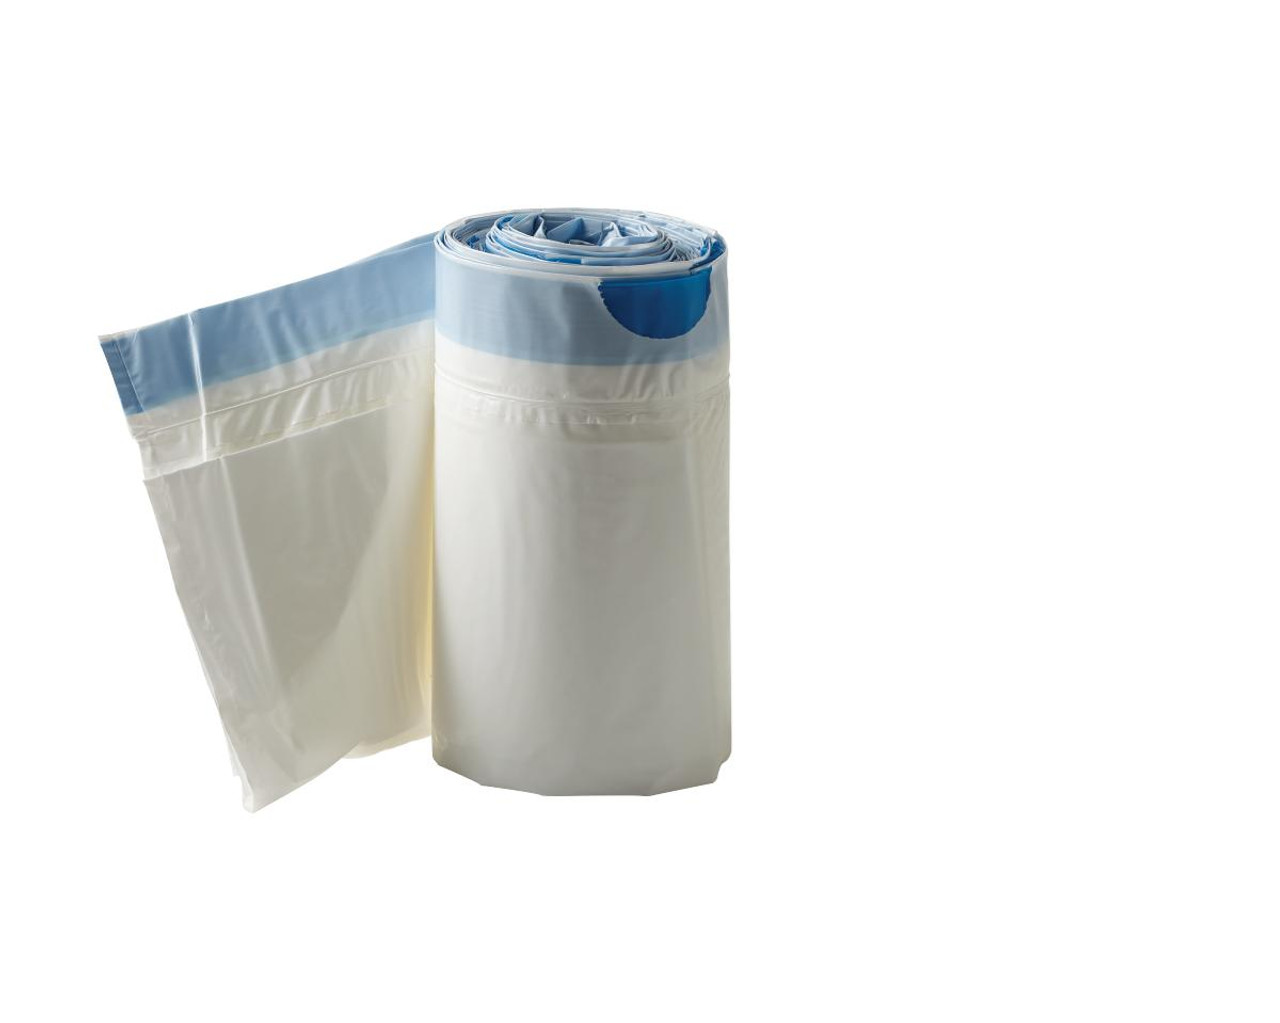 Medline MDS89664LINER Commode Liners with Absorbent Pads (Pack of 6)